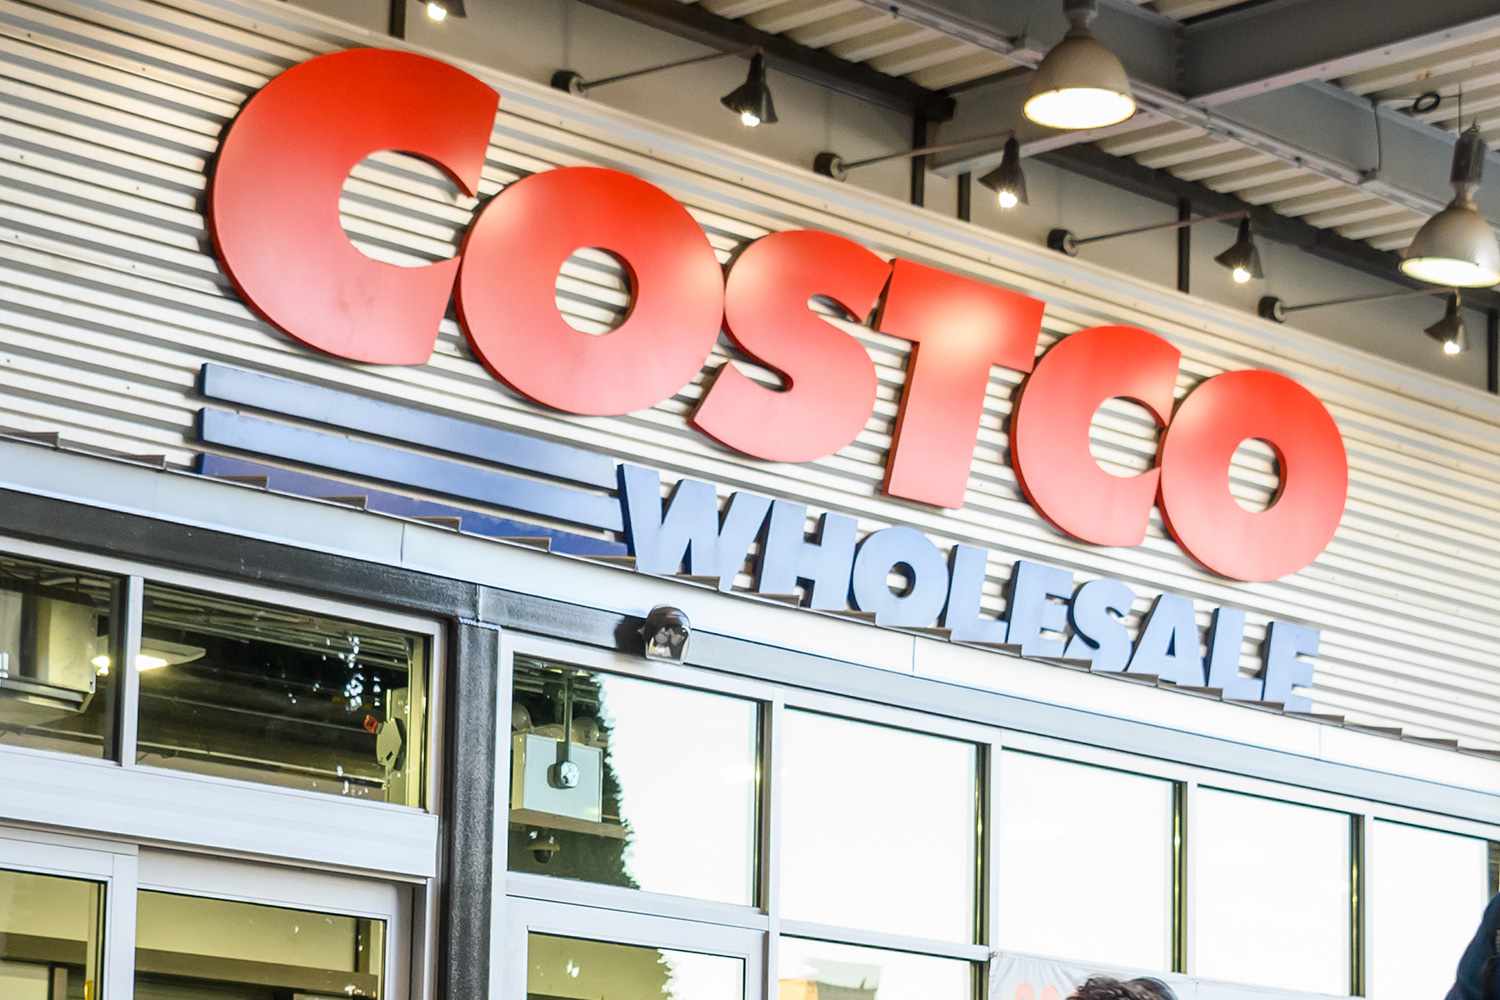 Costco Wholesale in East Harlem on November 24, 2020 in New York City